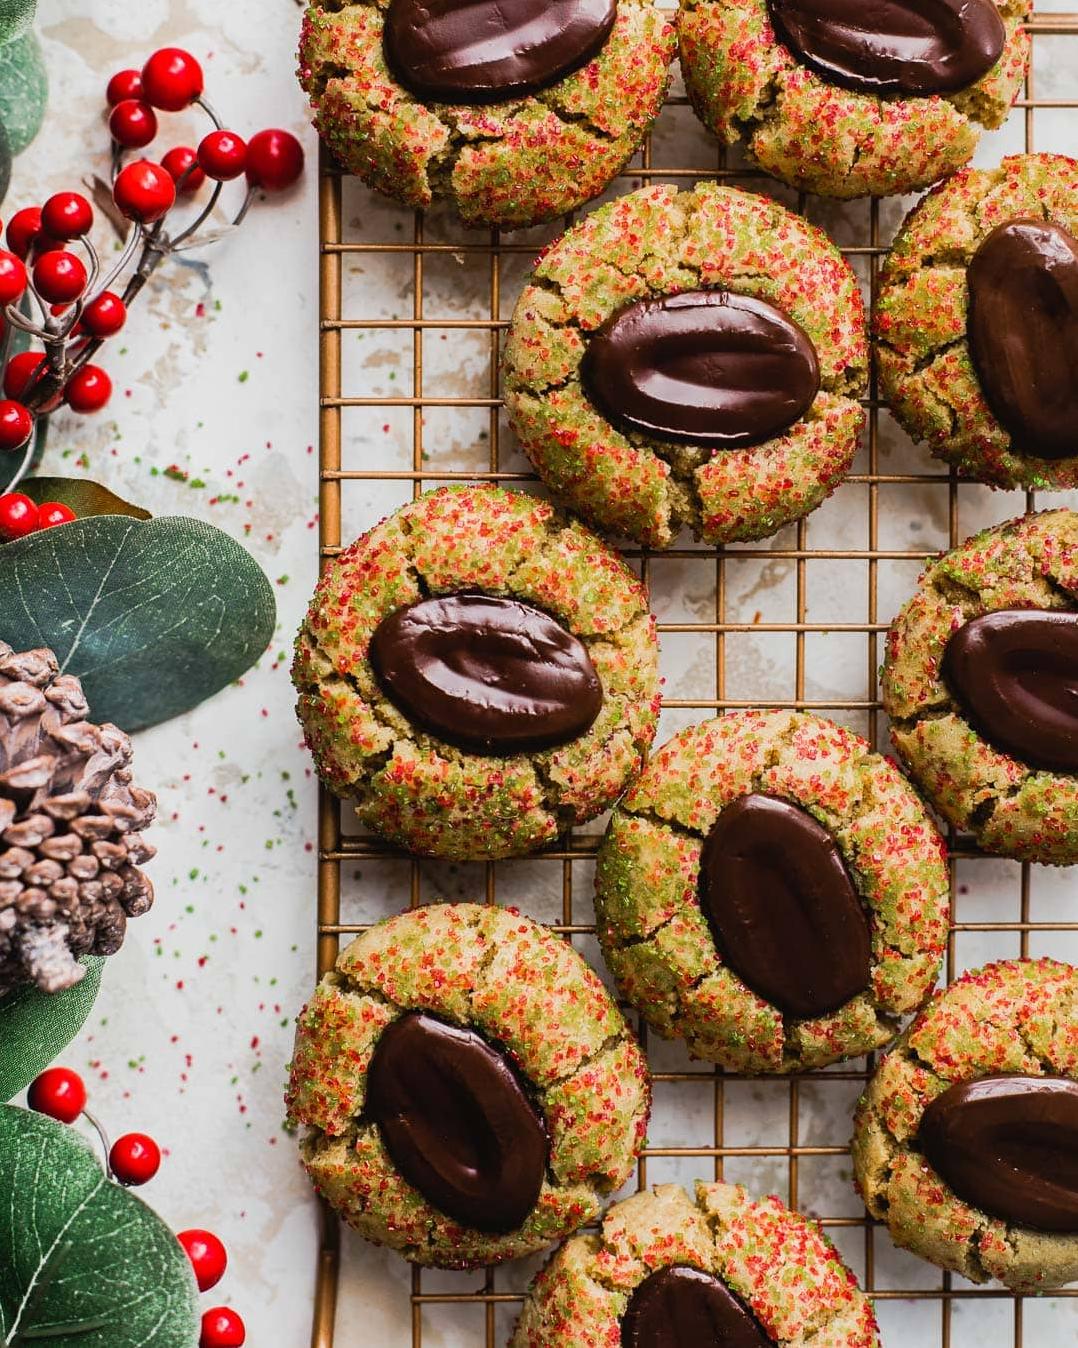  Who says you can't have cookies during the holidays while maintaining a gluten-free diet?